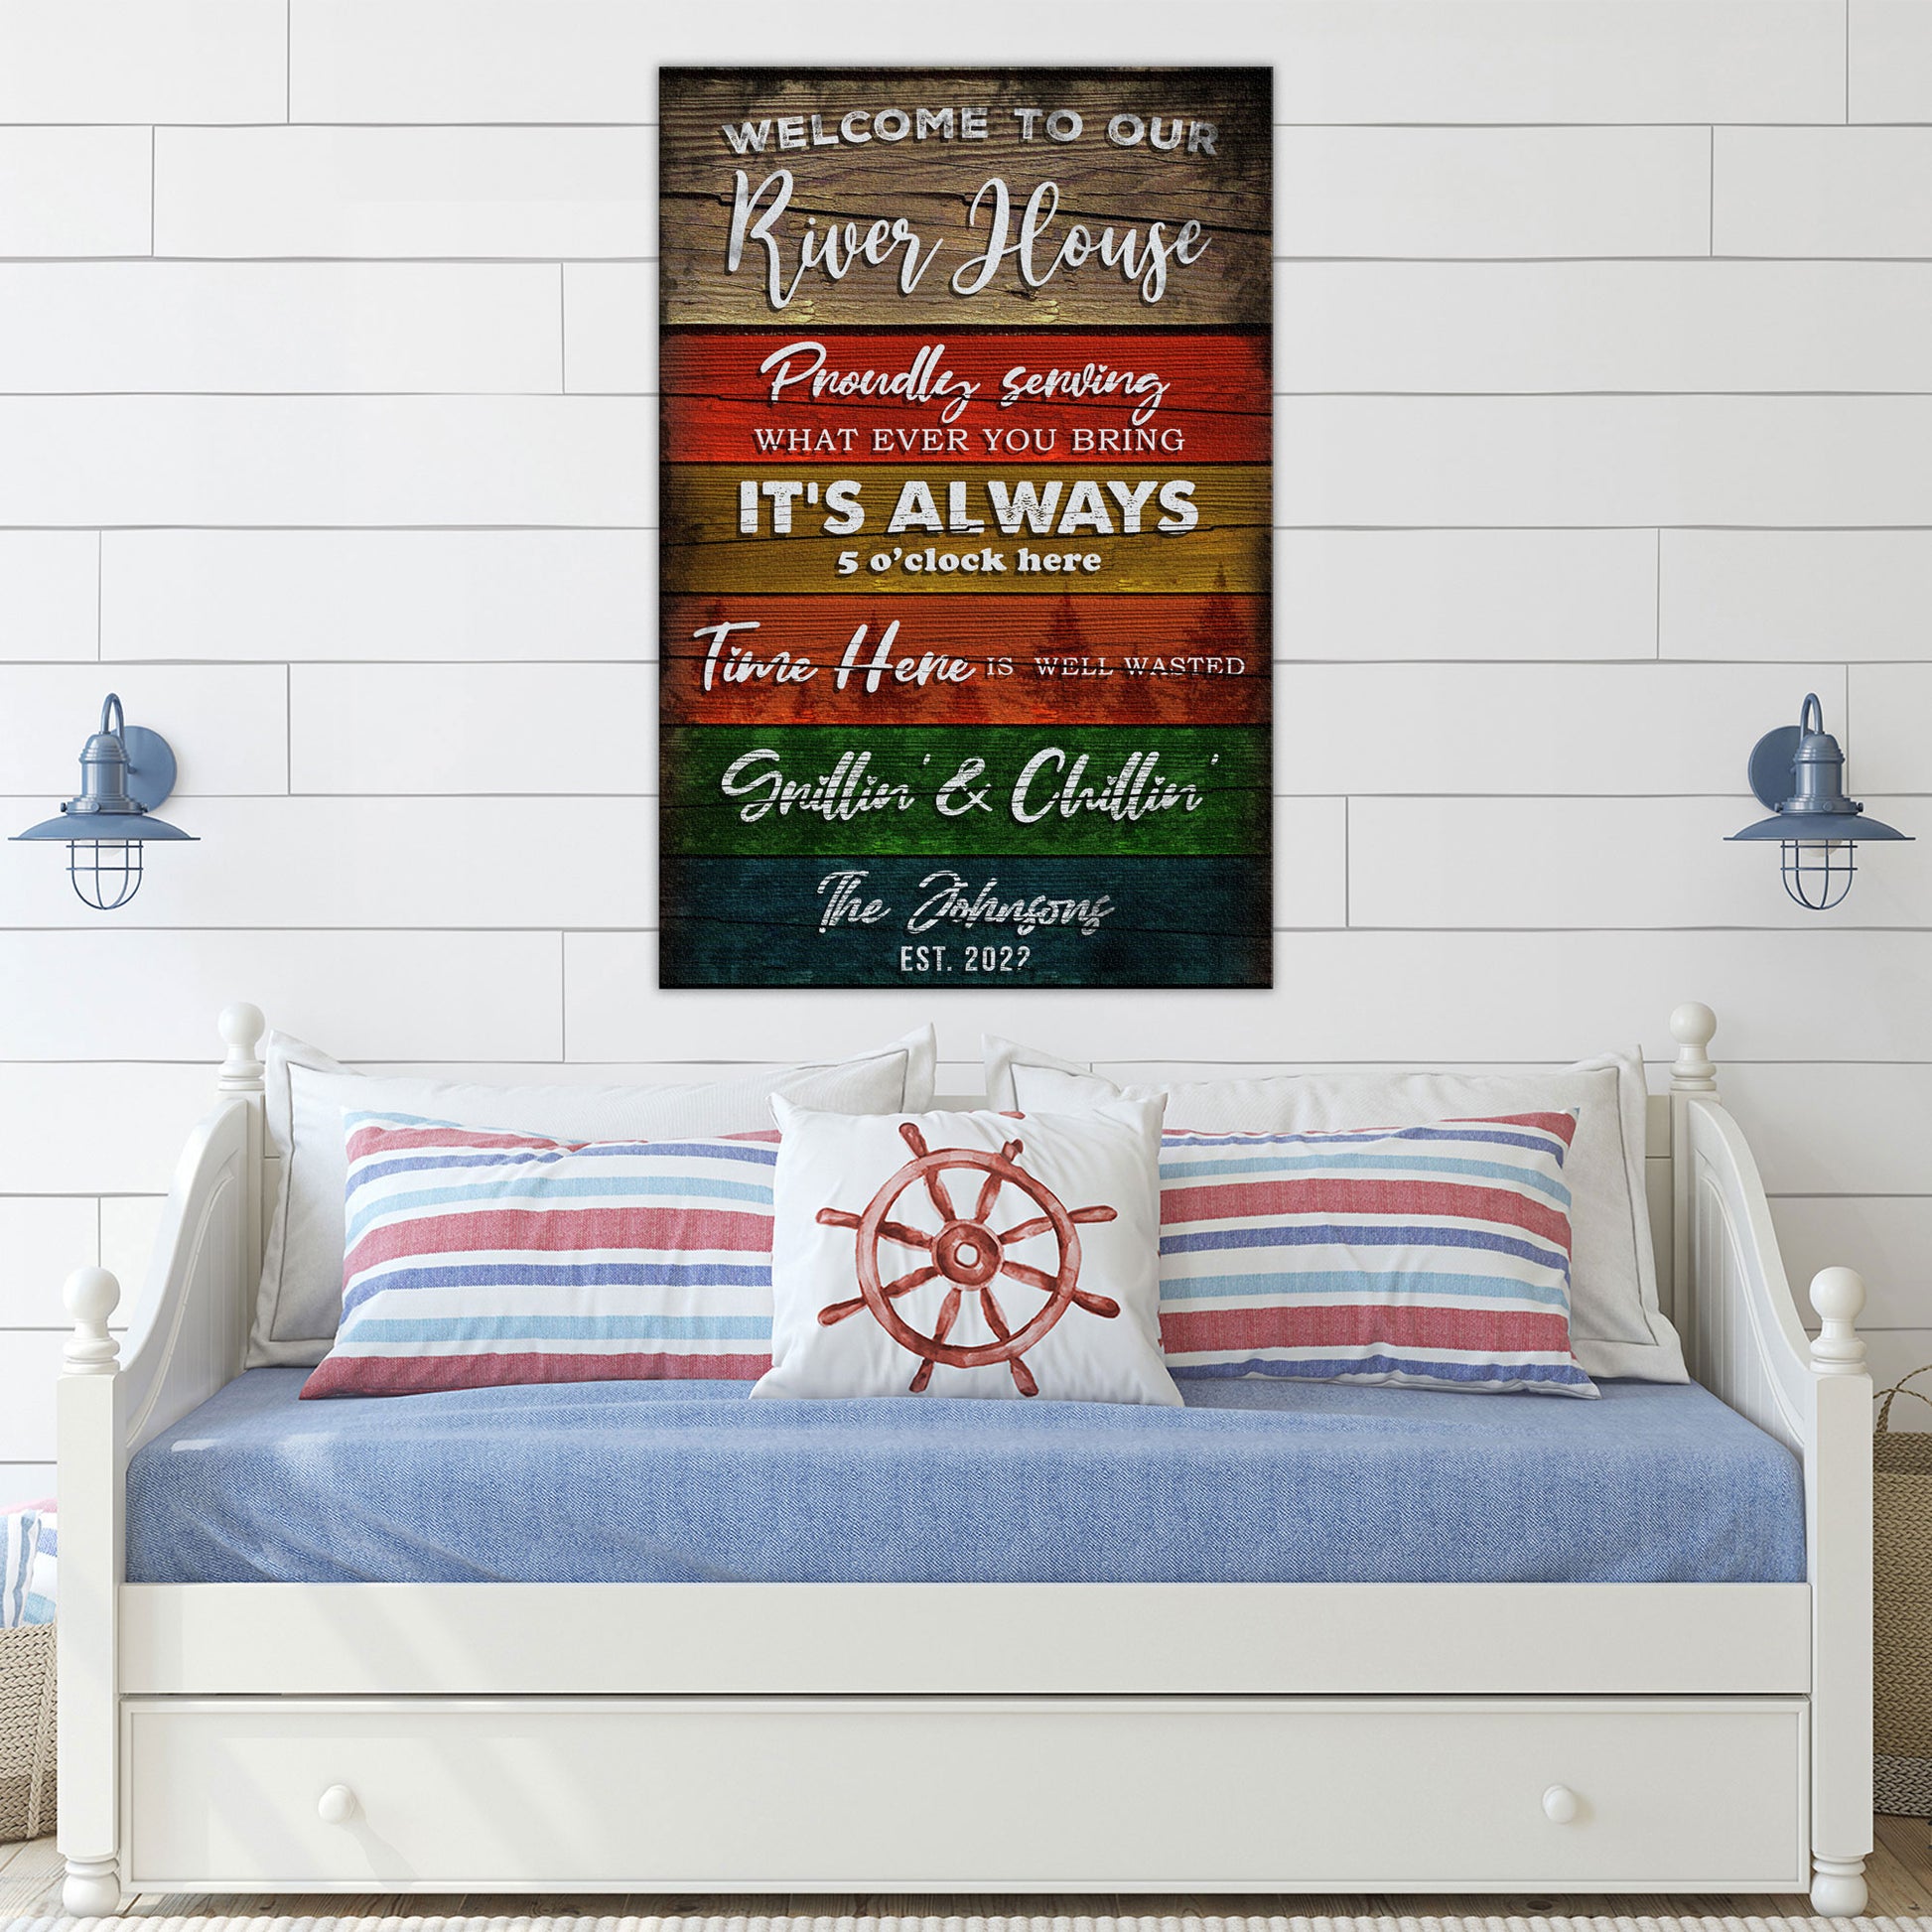 Welcome To Our River House Sign II - Image by Tailored Canvases